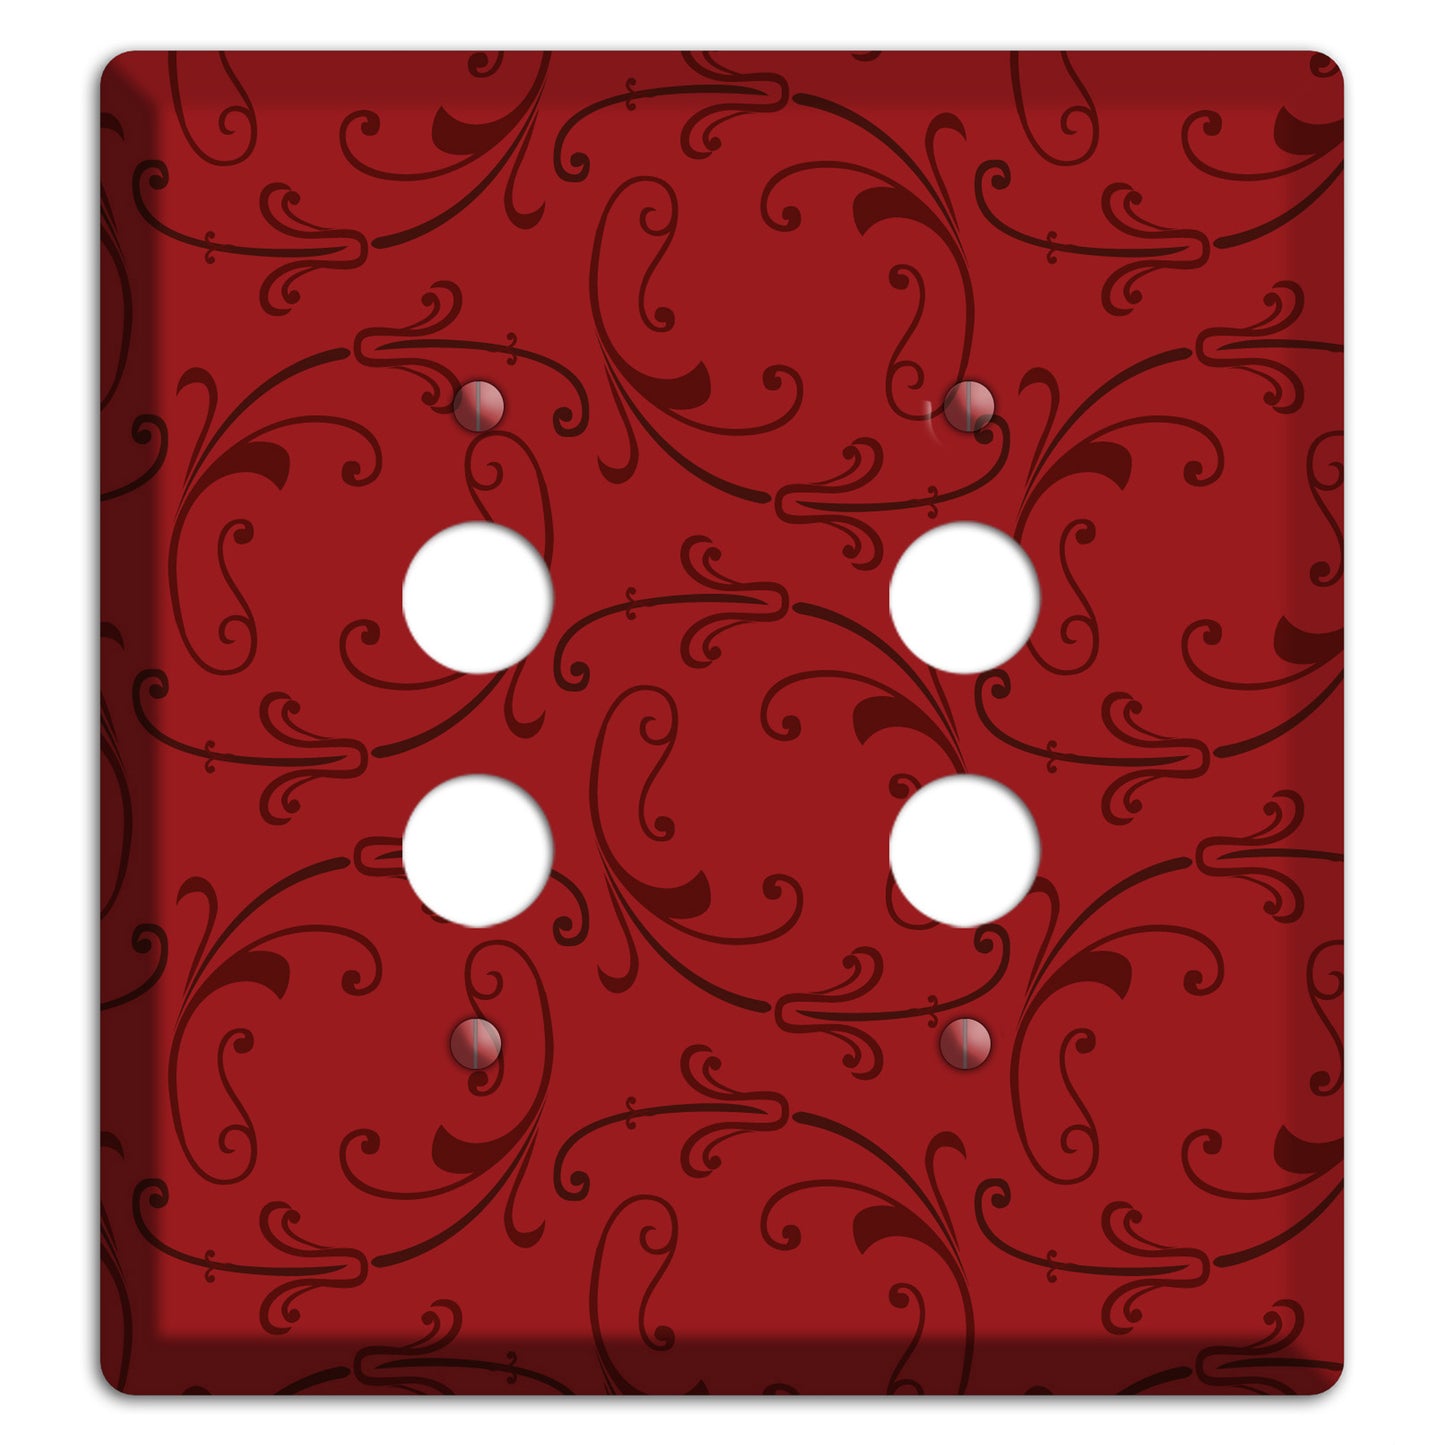 Red Victorian Sprig 2 Pushbutton Wallplate